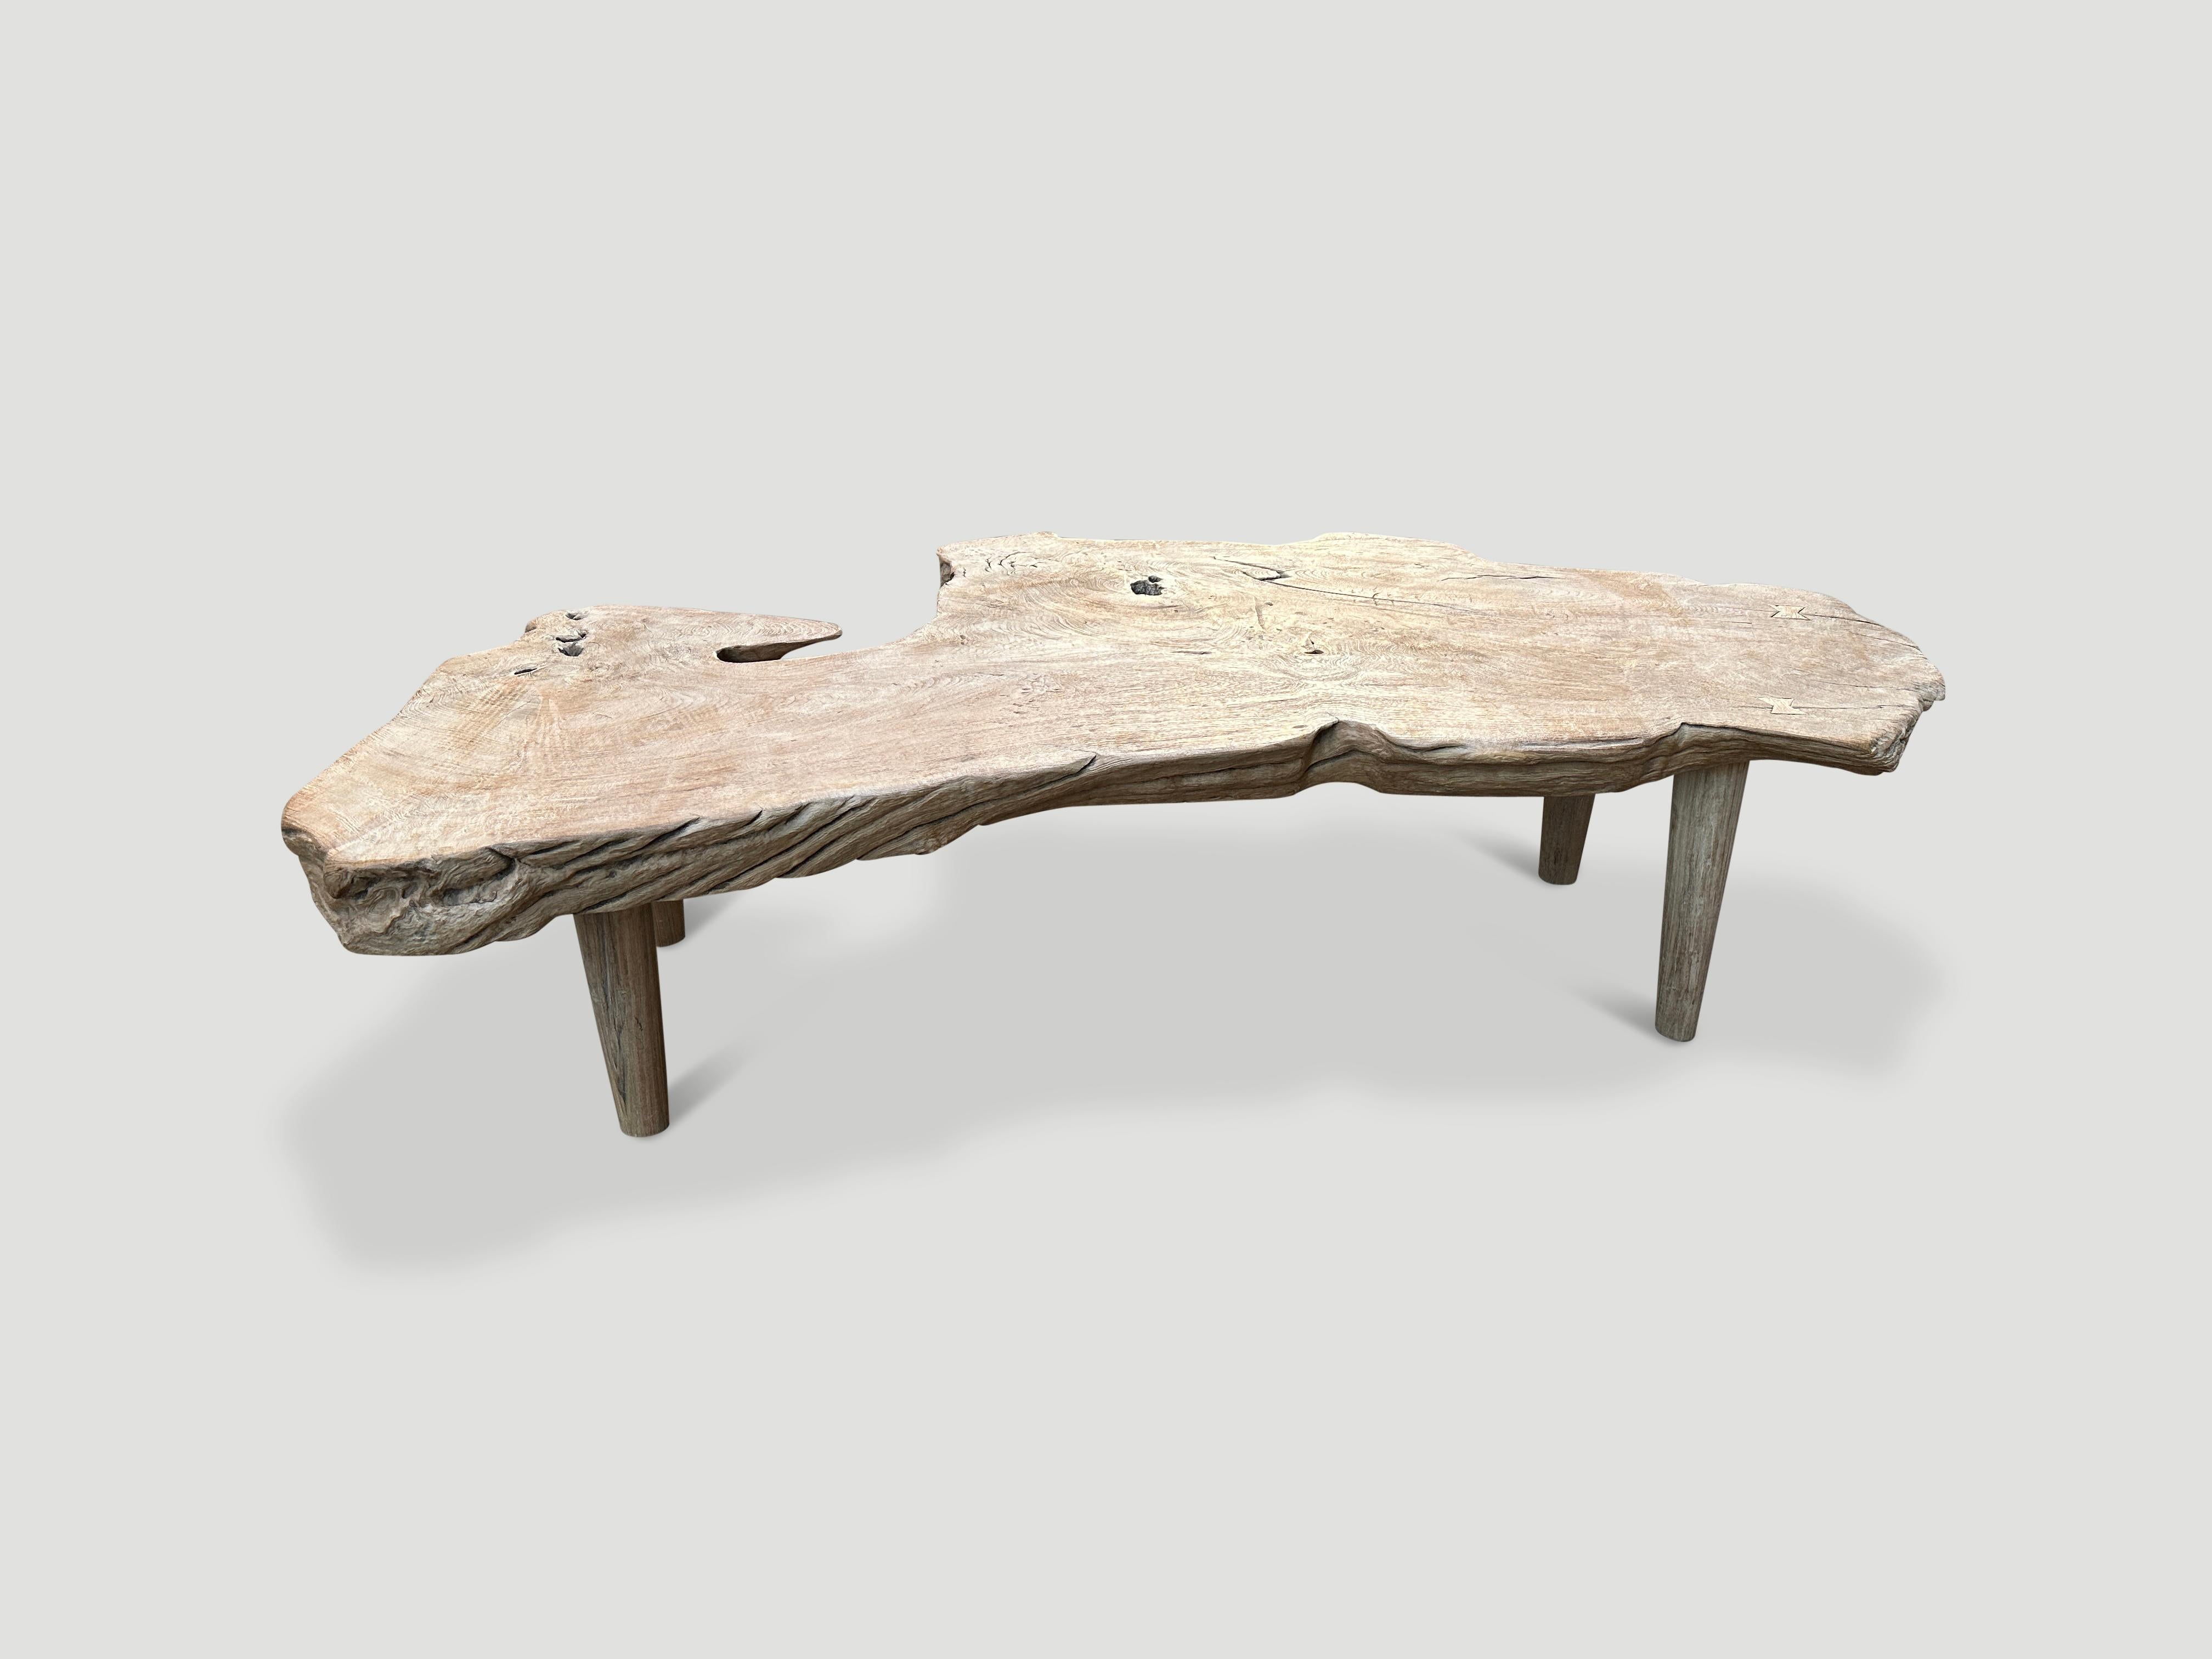 Andrianna Shamaris Organic White Washed Teak Wood Coffee Table In Excellent Condition For Sale In New York, NY